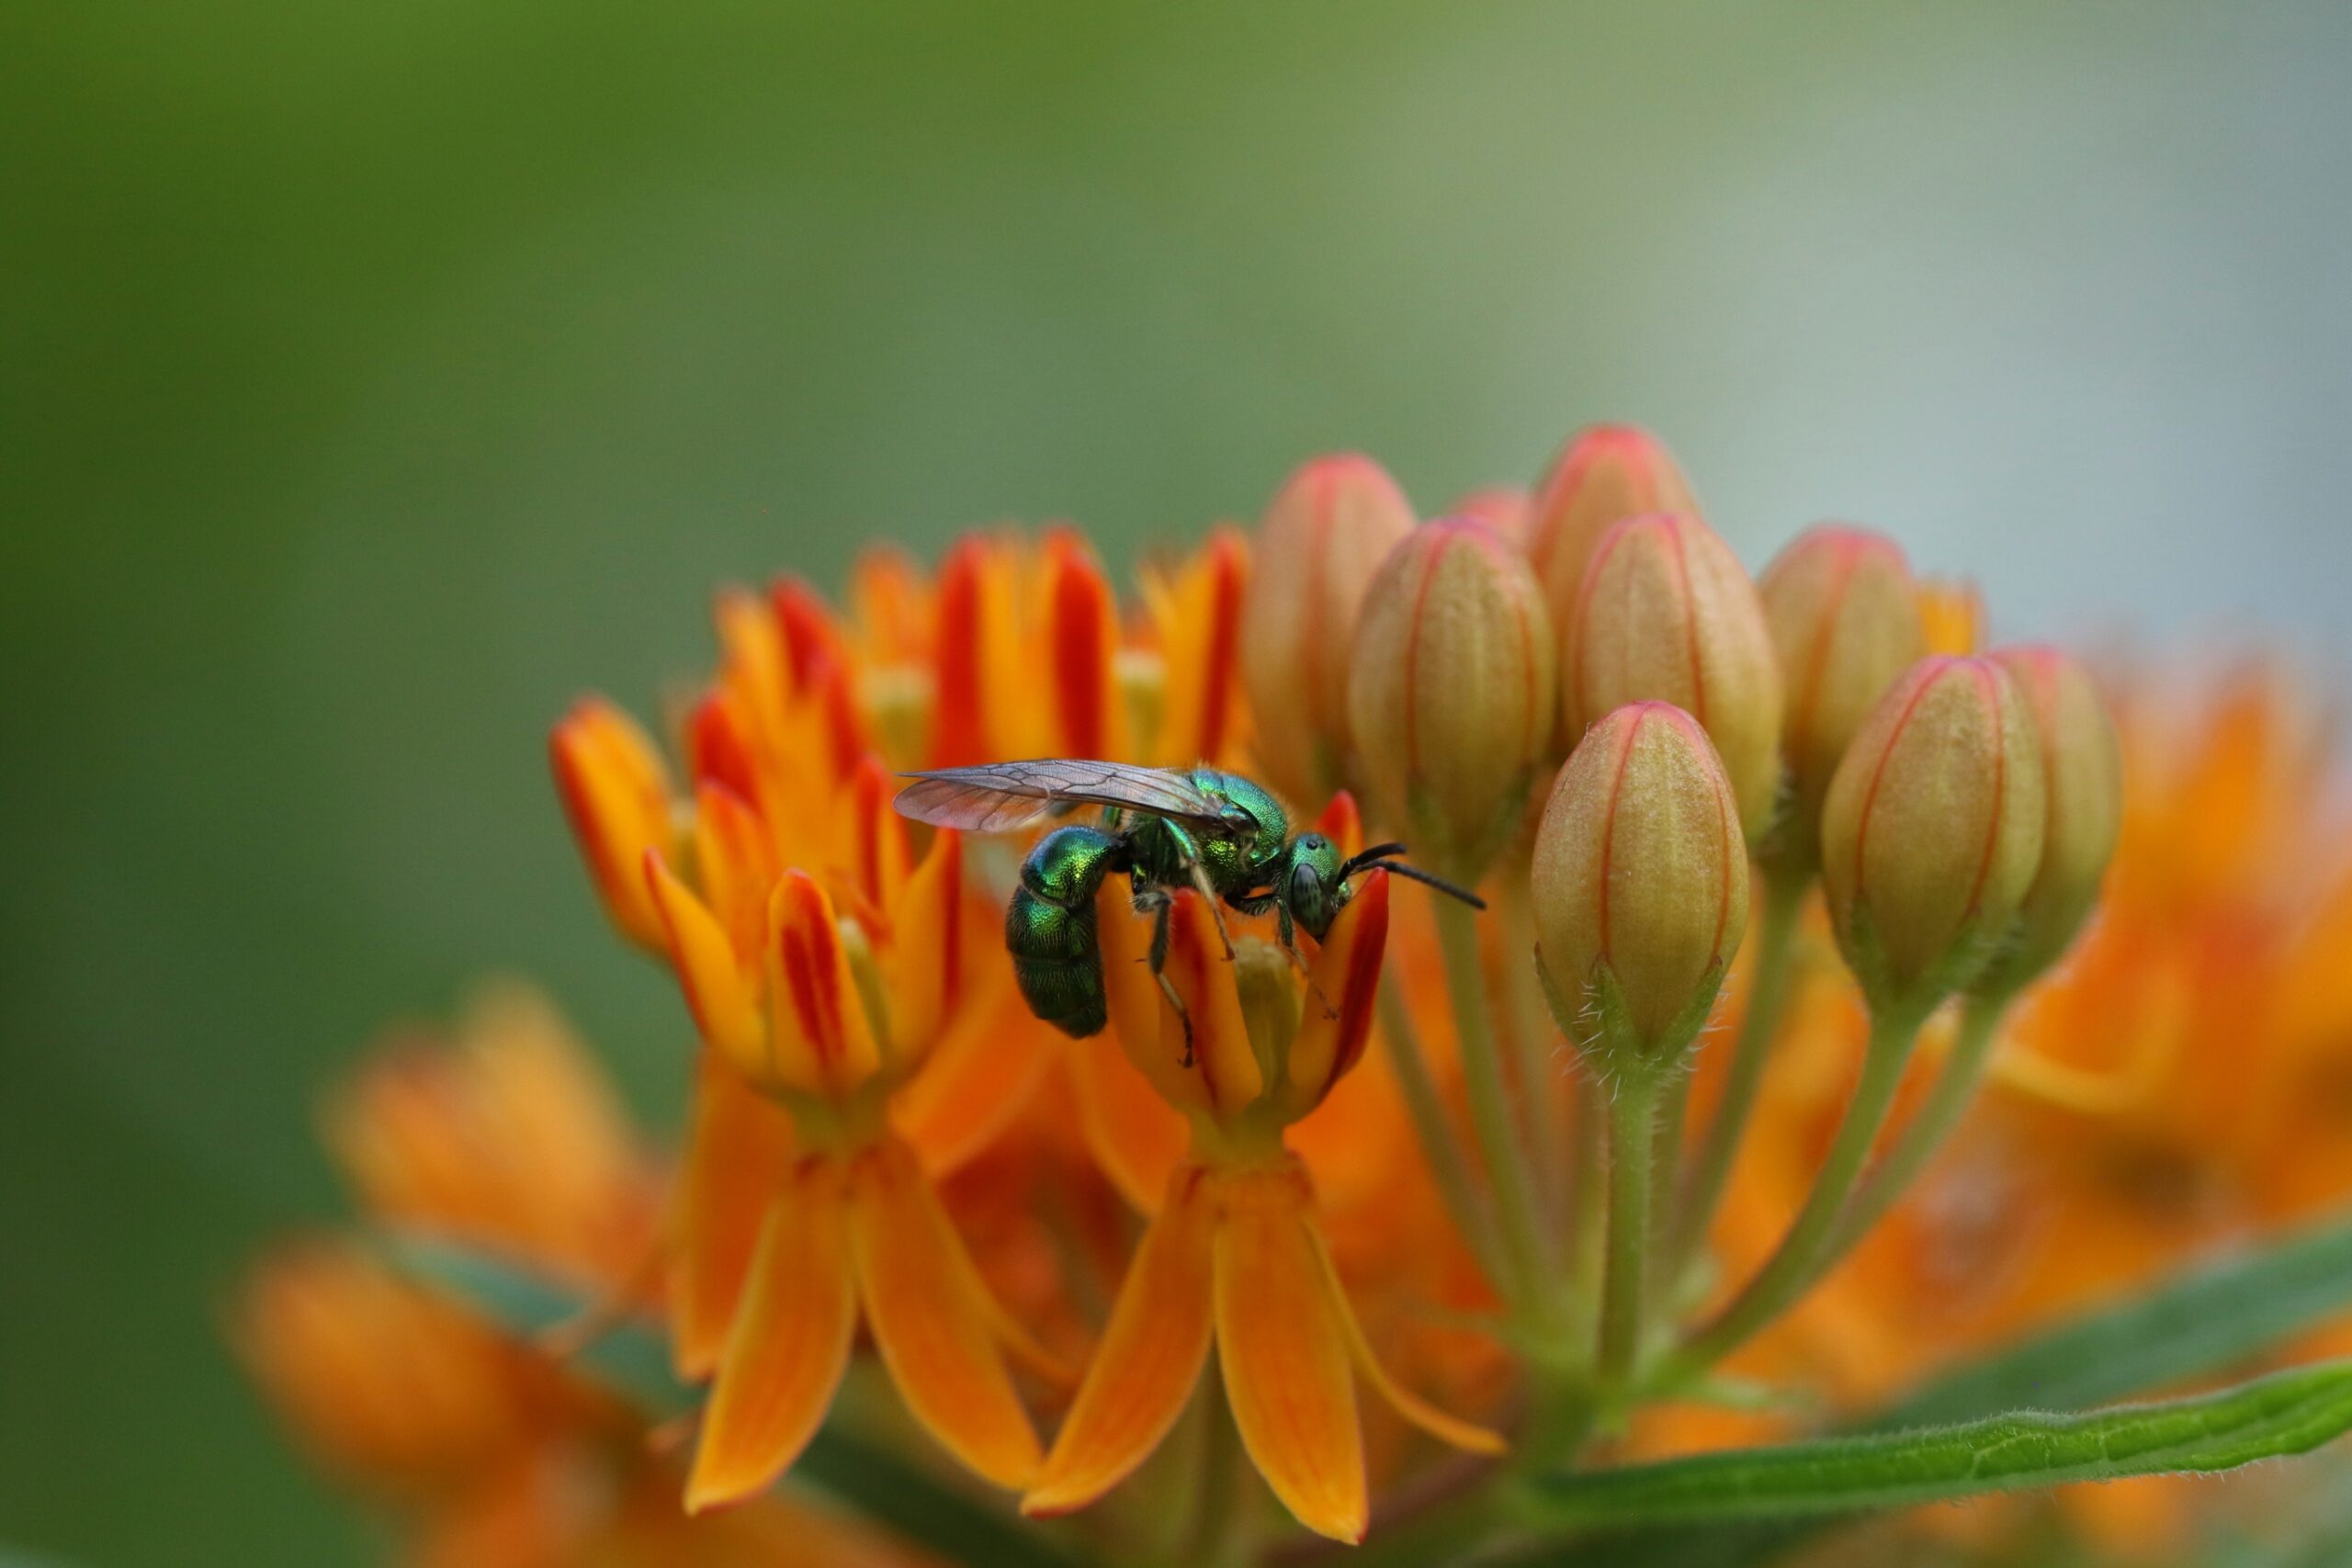 A green sweat bee foragings on butterfly weed flowers.